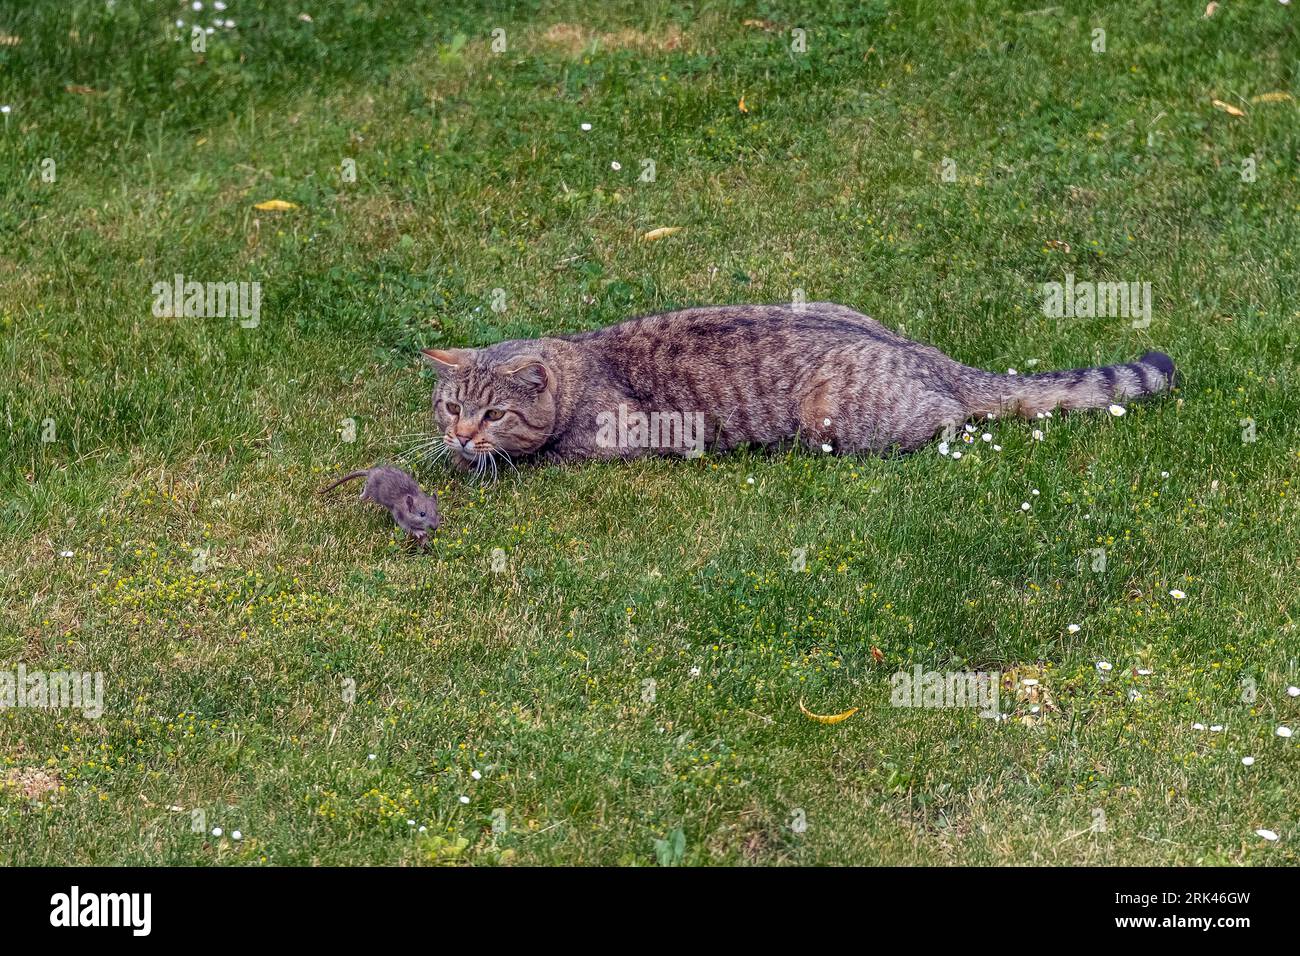 Domestic Cat (Felis sylvestris familiaris) hunting a House Mouse (Mus musculus domesticus) on a grass of a garden, Sterrebeek, Brabant, Belgium. Stock Photo